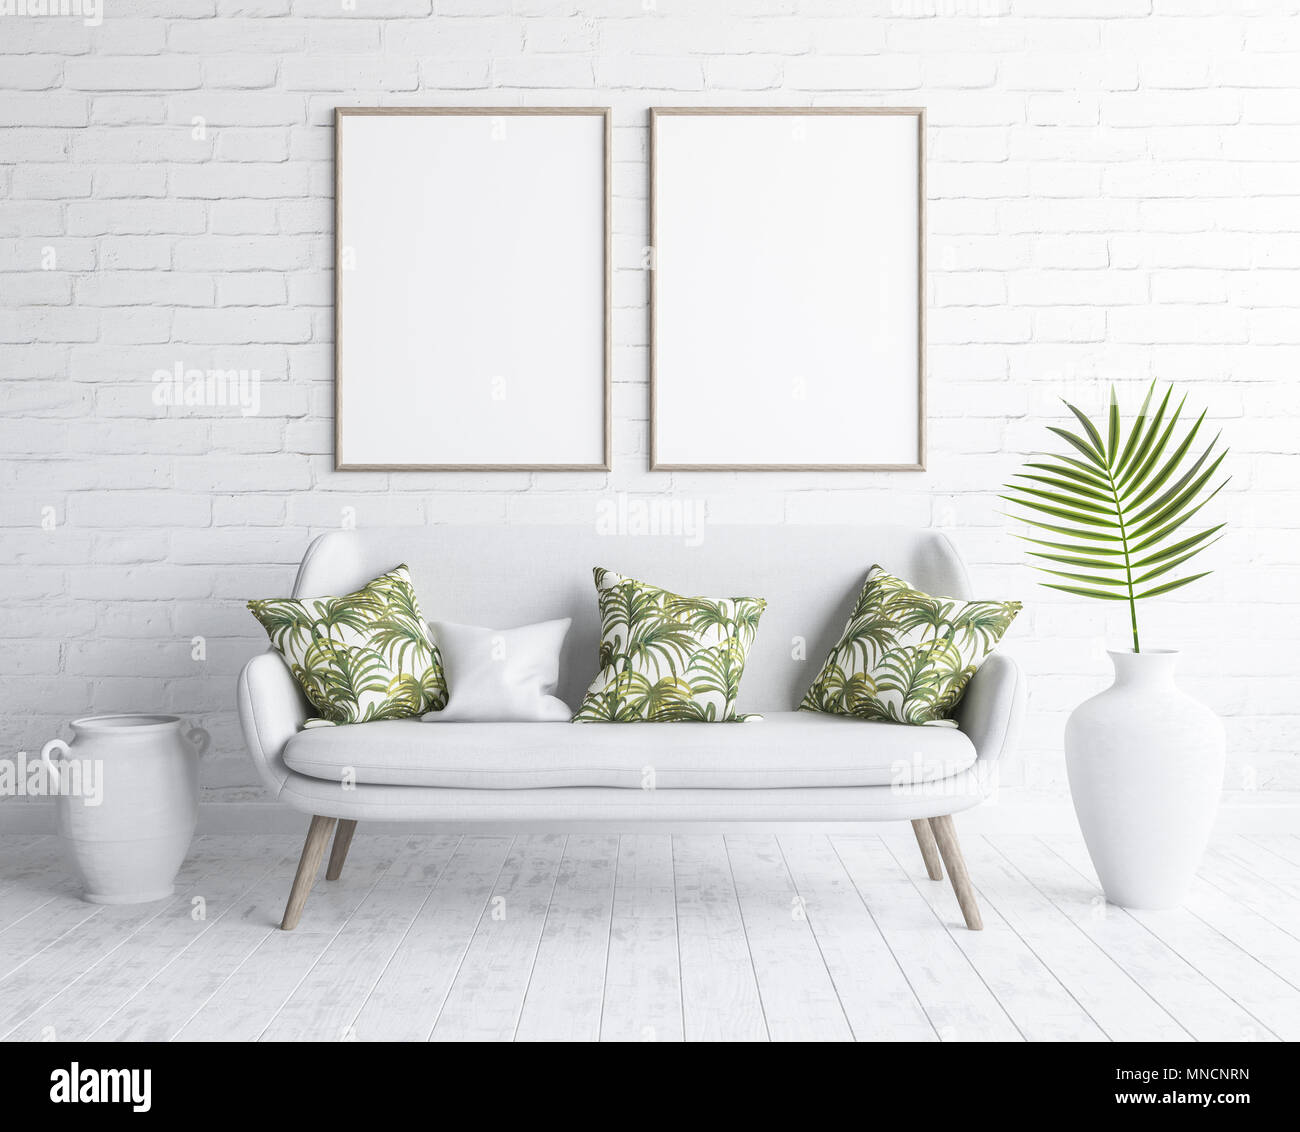 Mock Up Frames In Living Room Interior With White Sofa On White